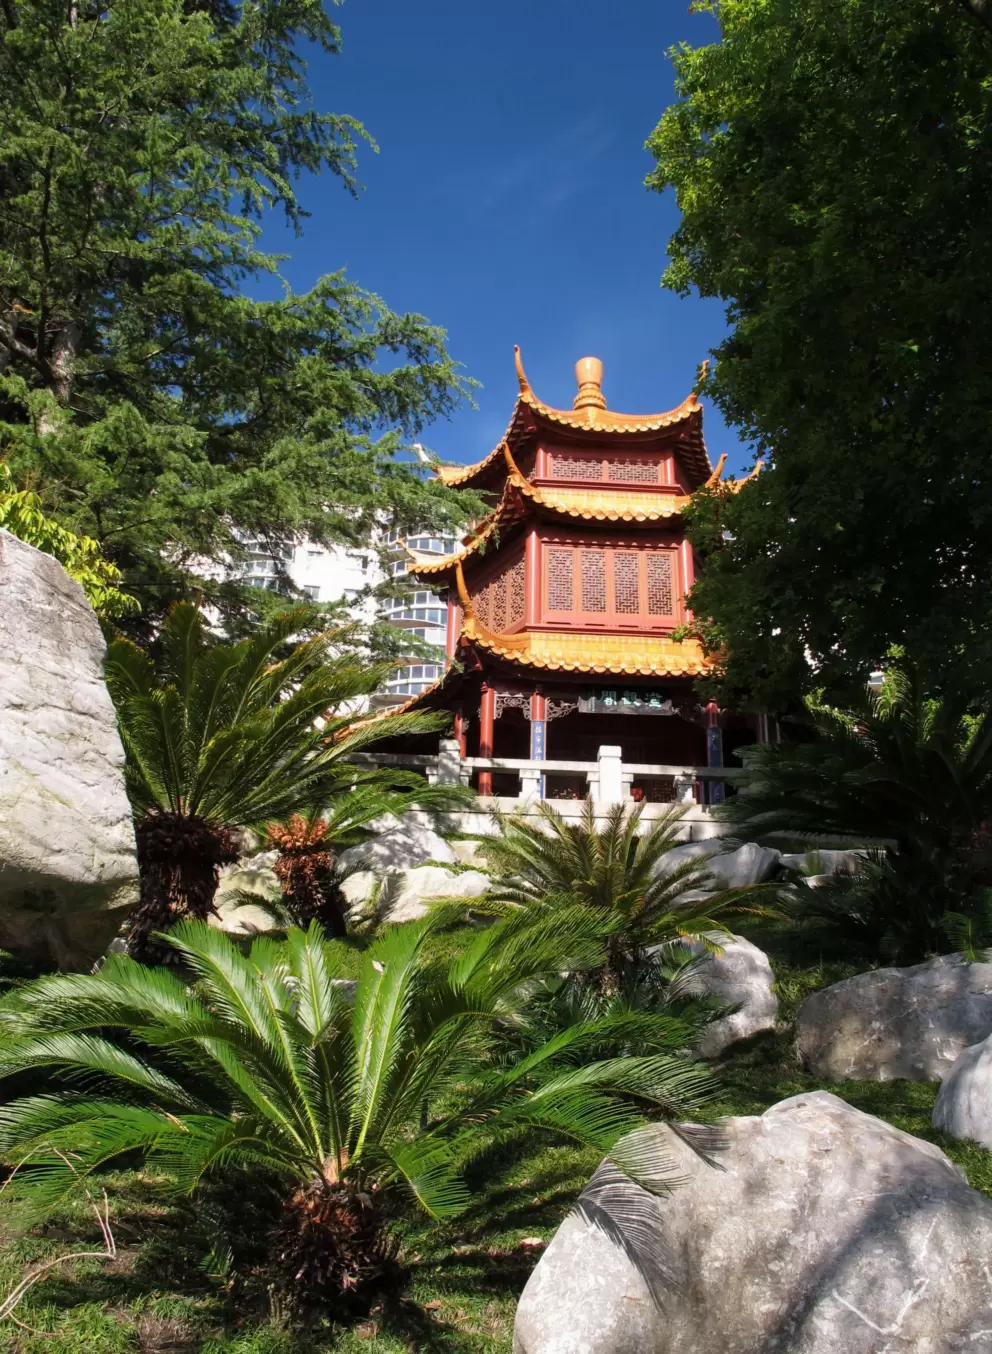 Chinese Garden of Friendship, Darling Harbour